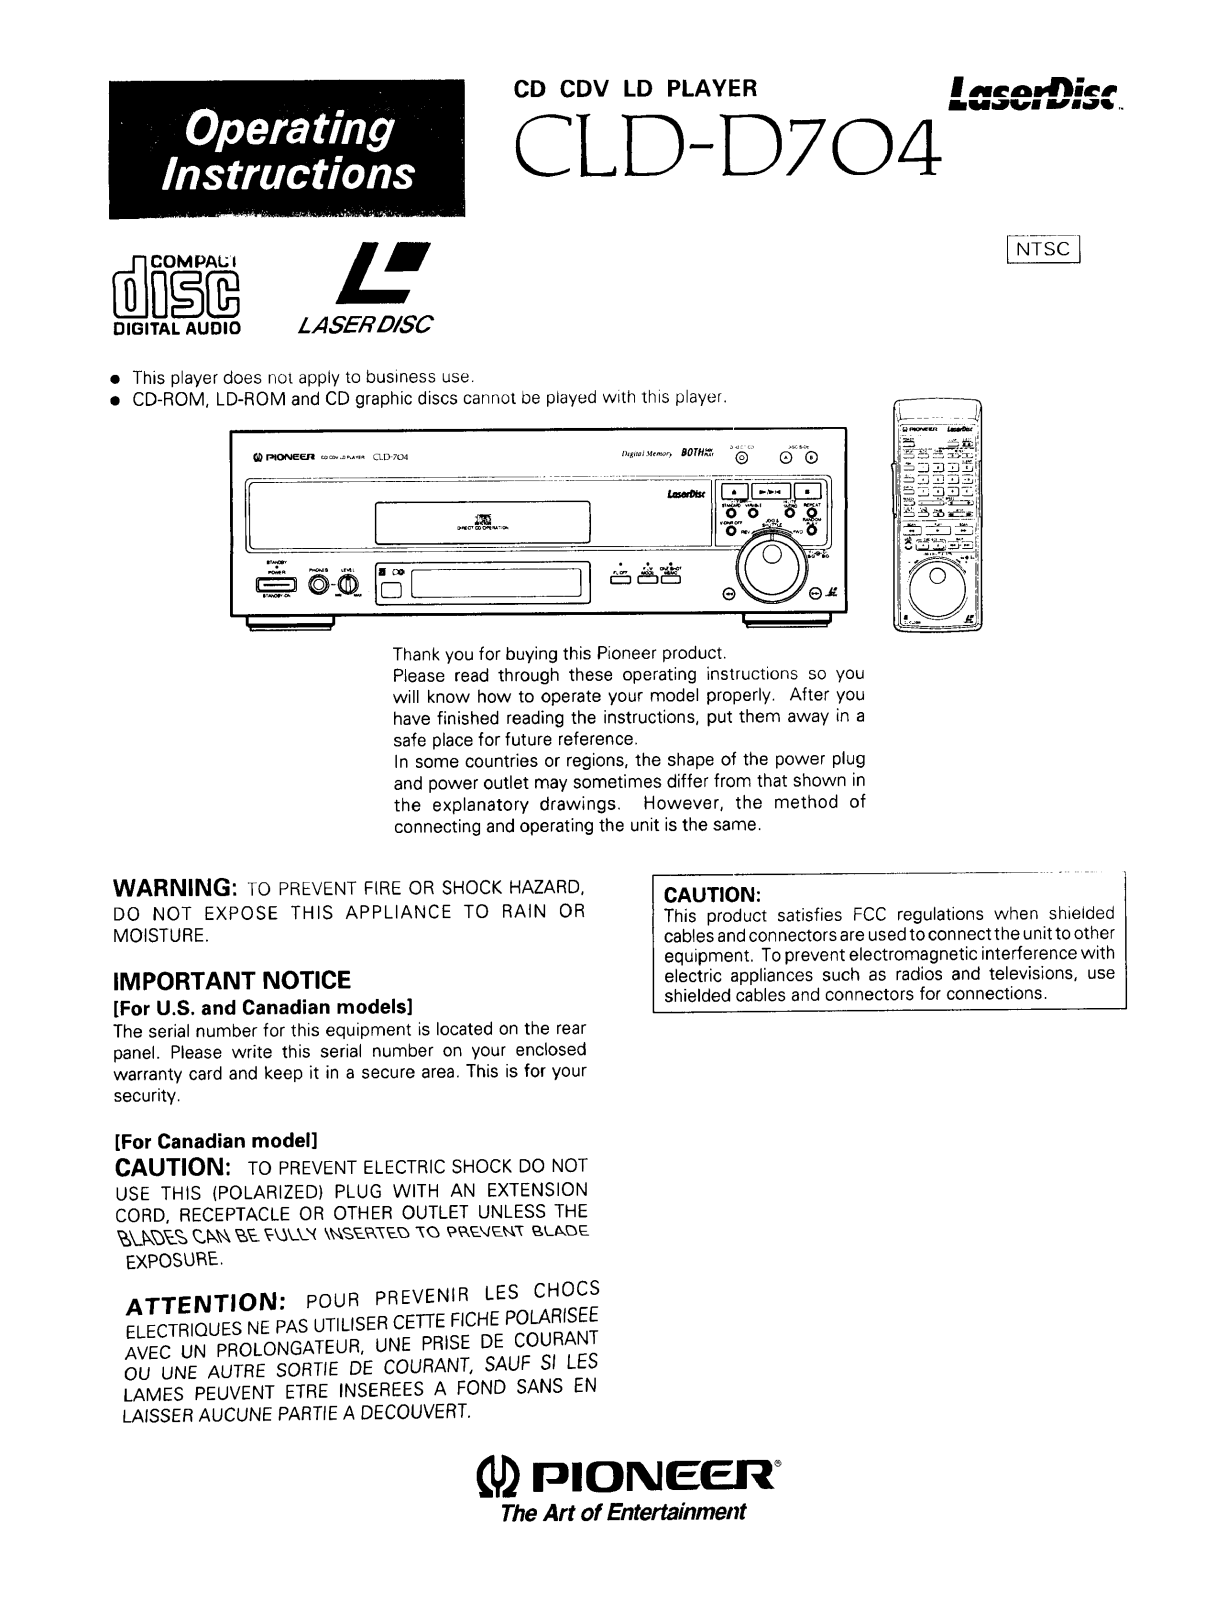 Pioneer CLD-D704 Owner’s Manual